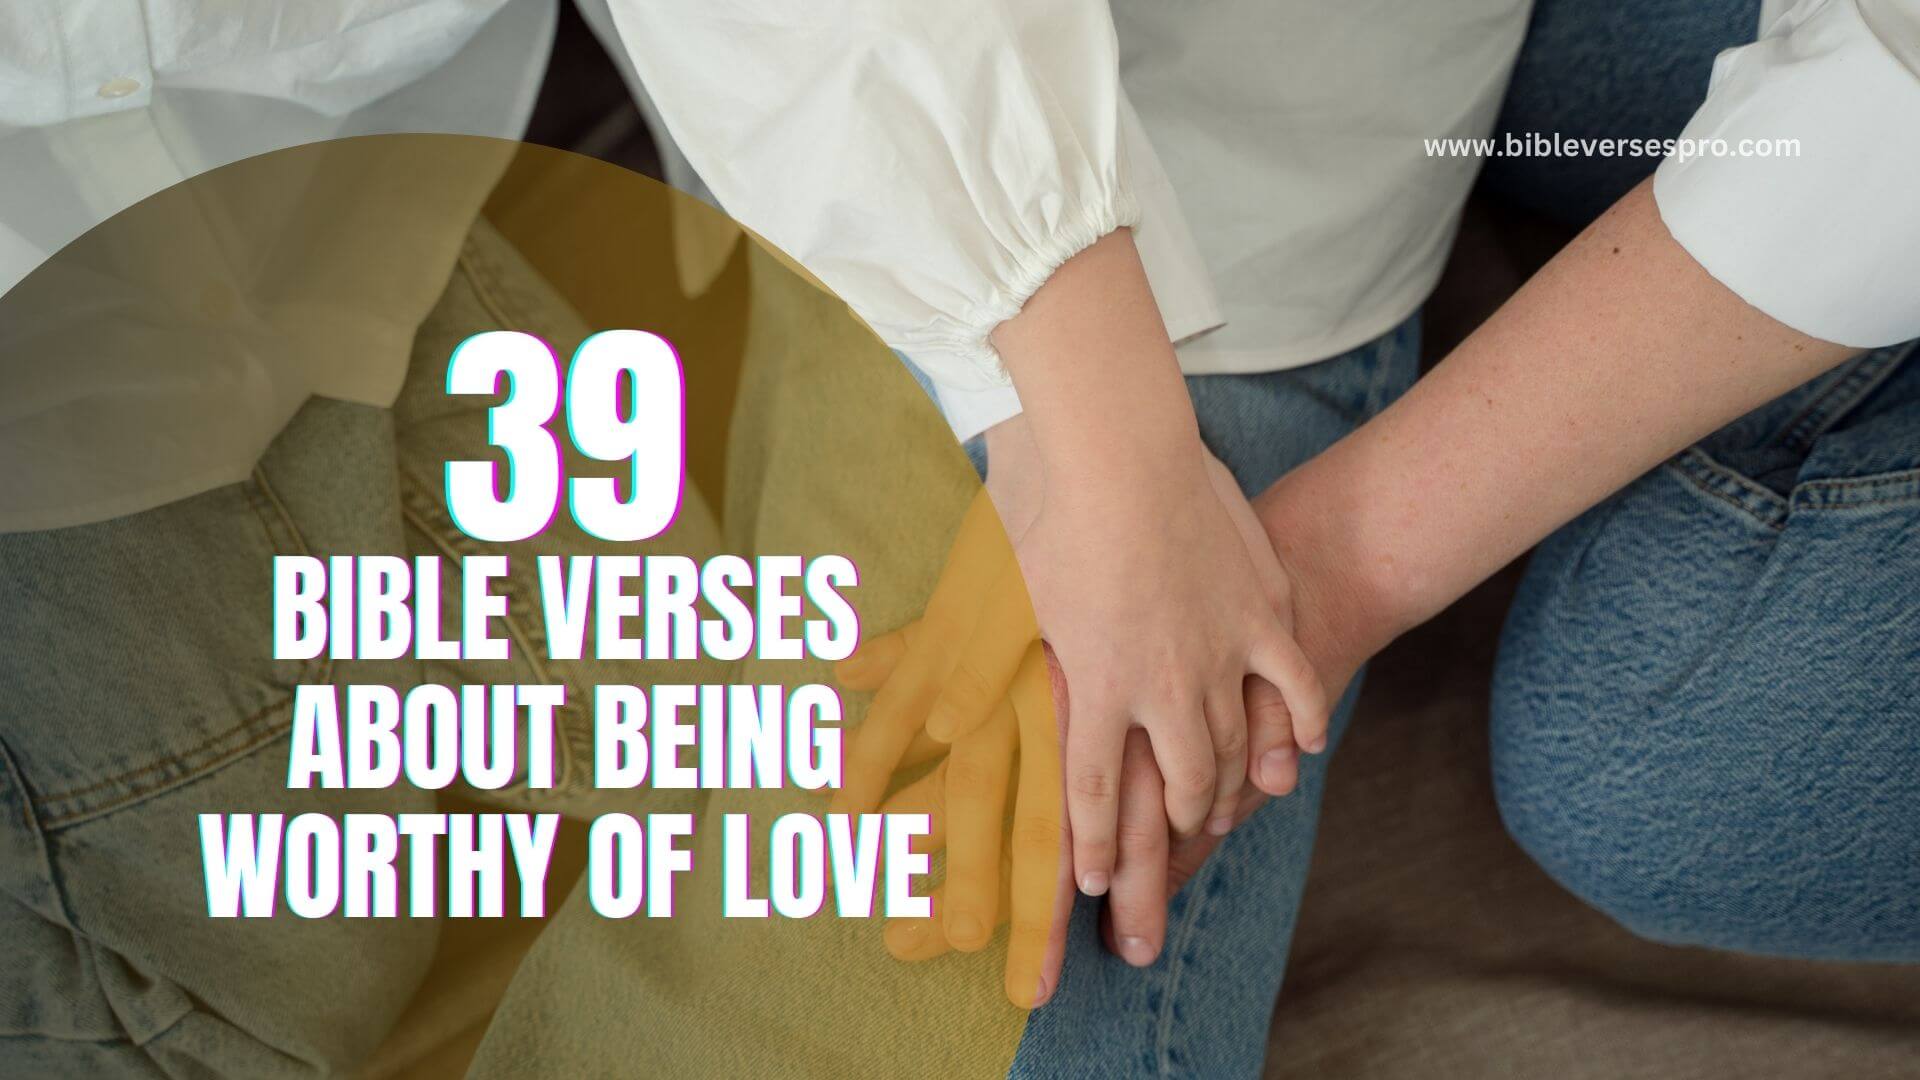 BIBLE VERSES ABOUT BEING WORTHY OF LOVE (1)